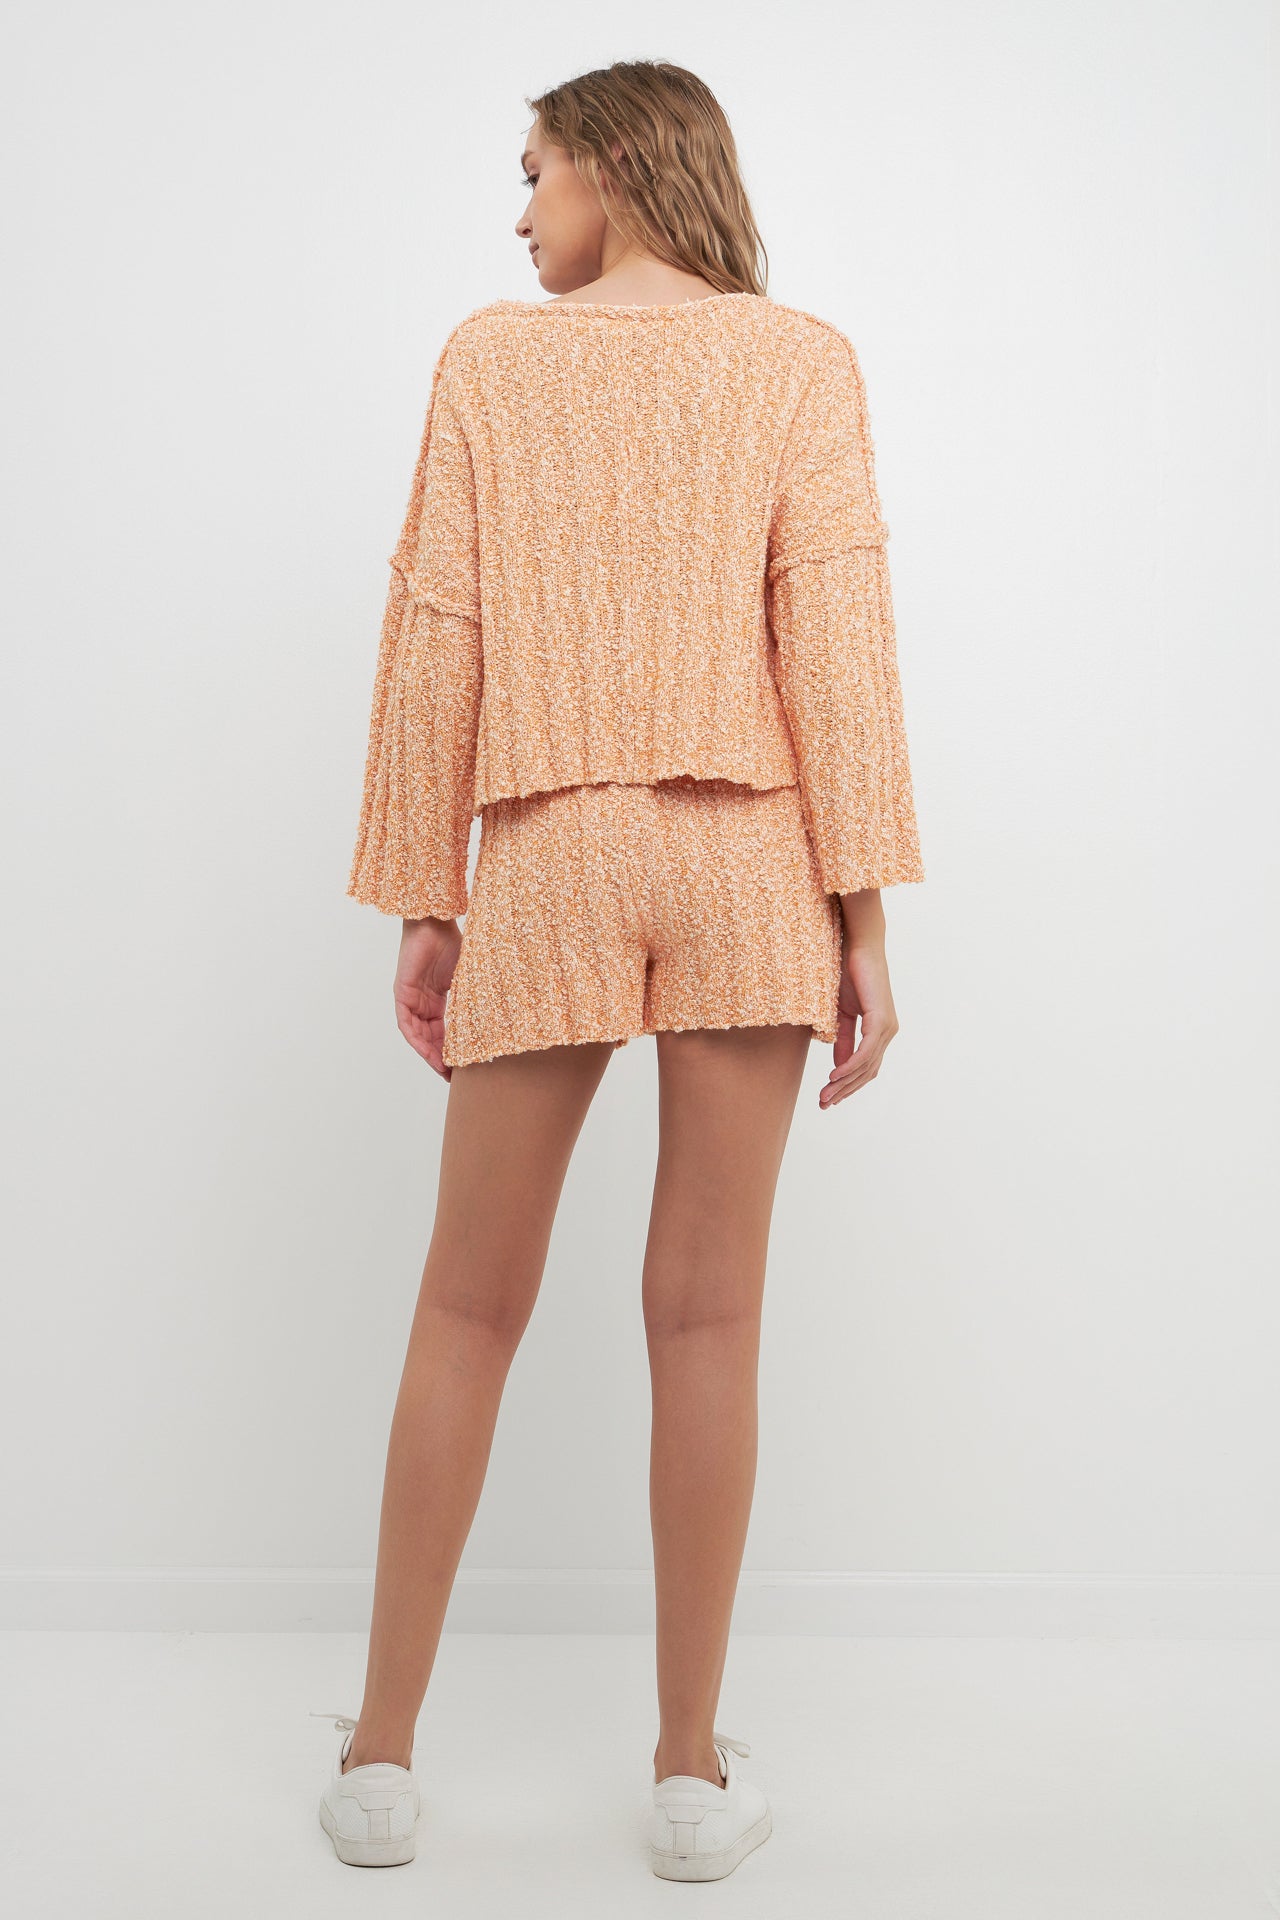 FREE THE ROSES - Cozy Sweater Shorts - SWEATERS & KNITS available at Objectrare